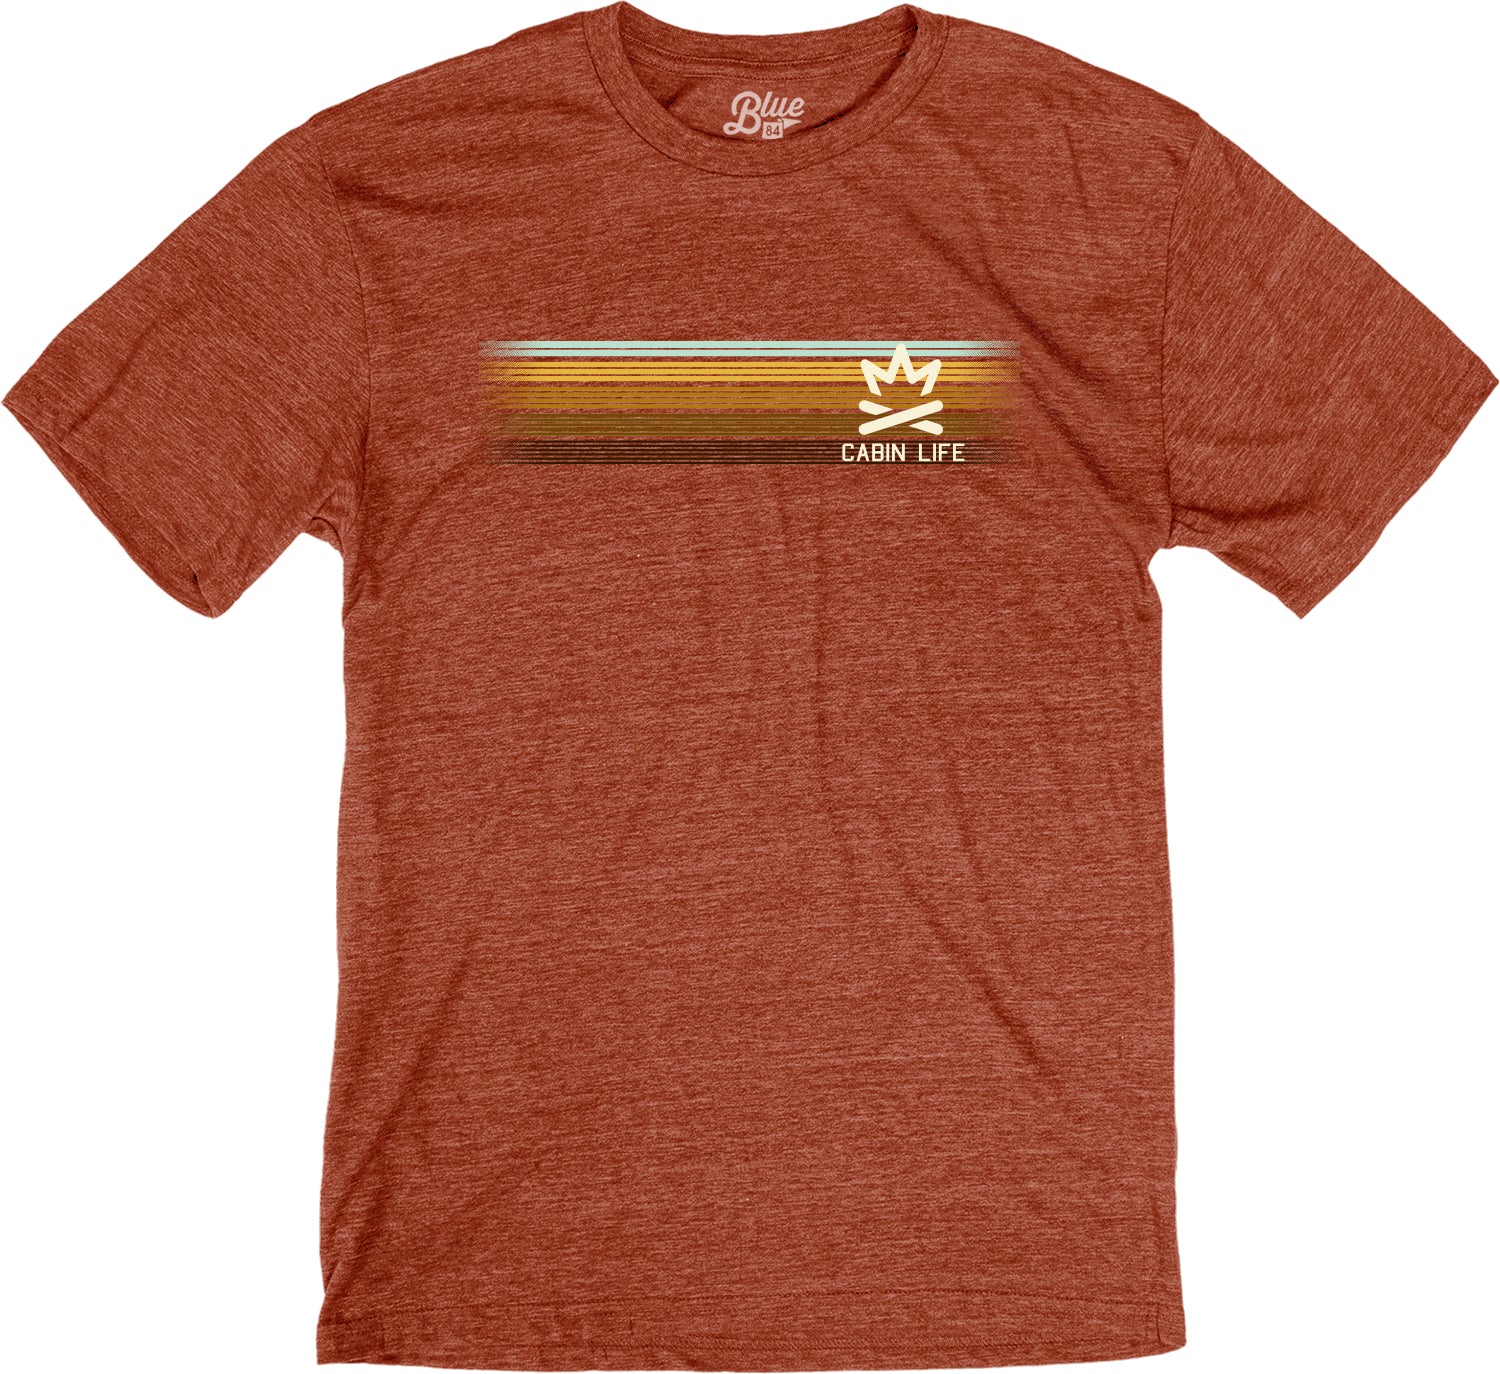 Made For Cabin Life Triblend Tee